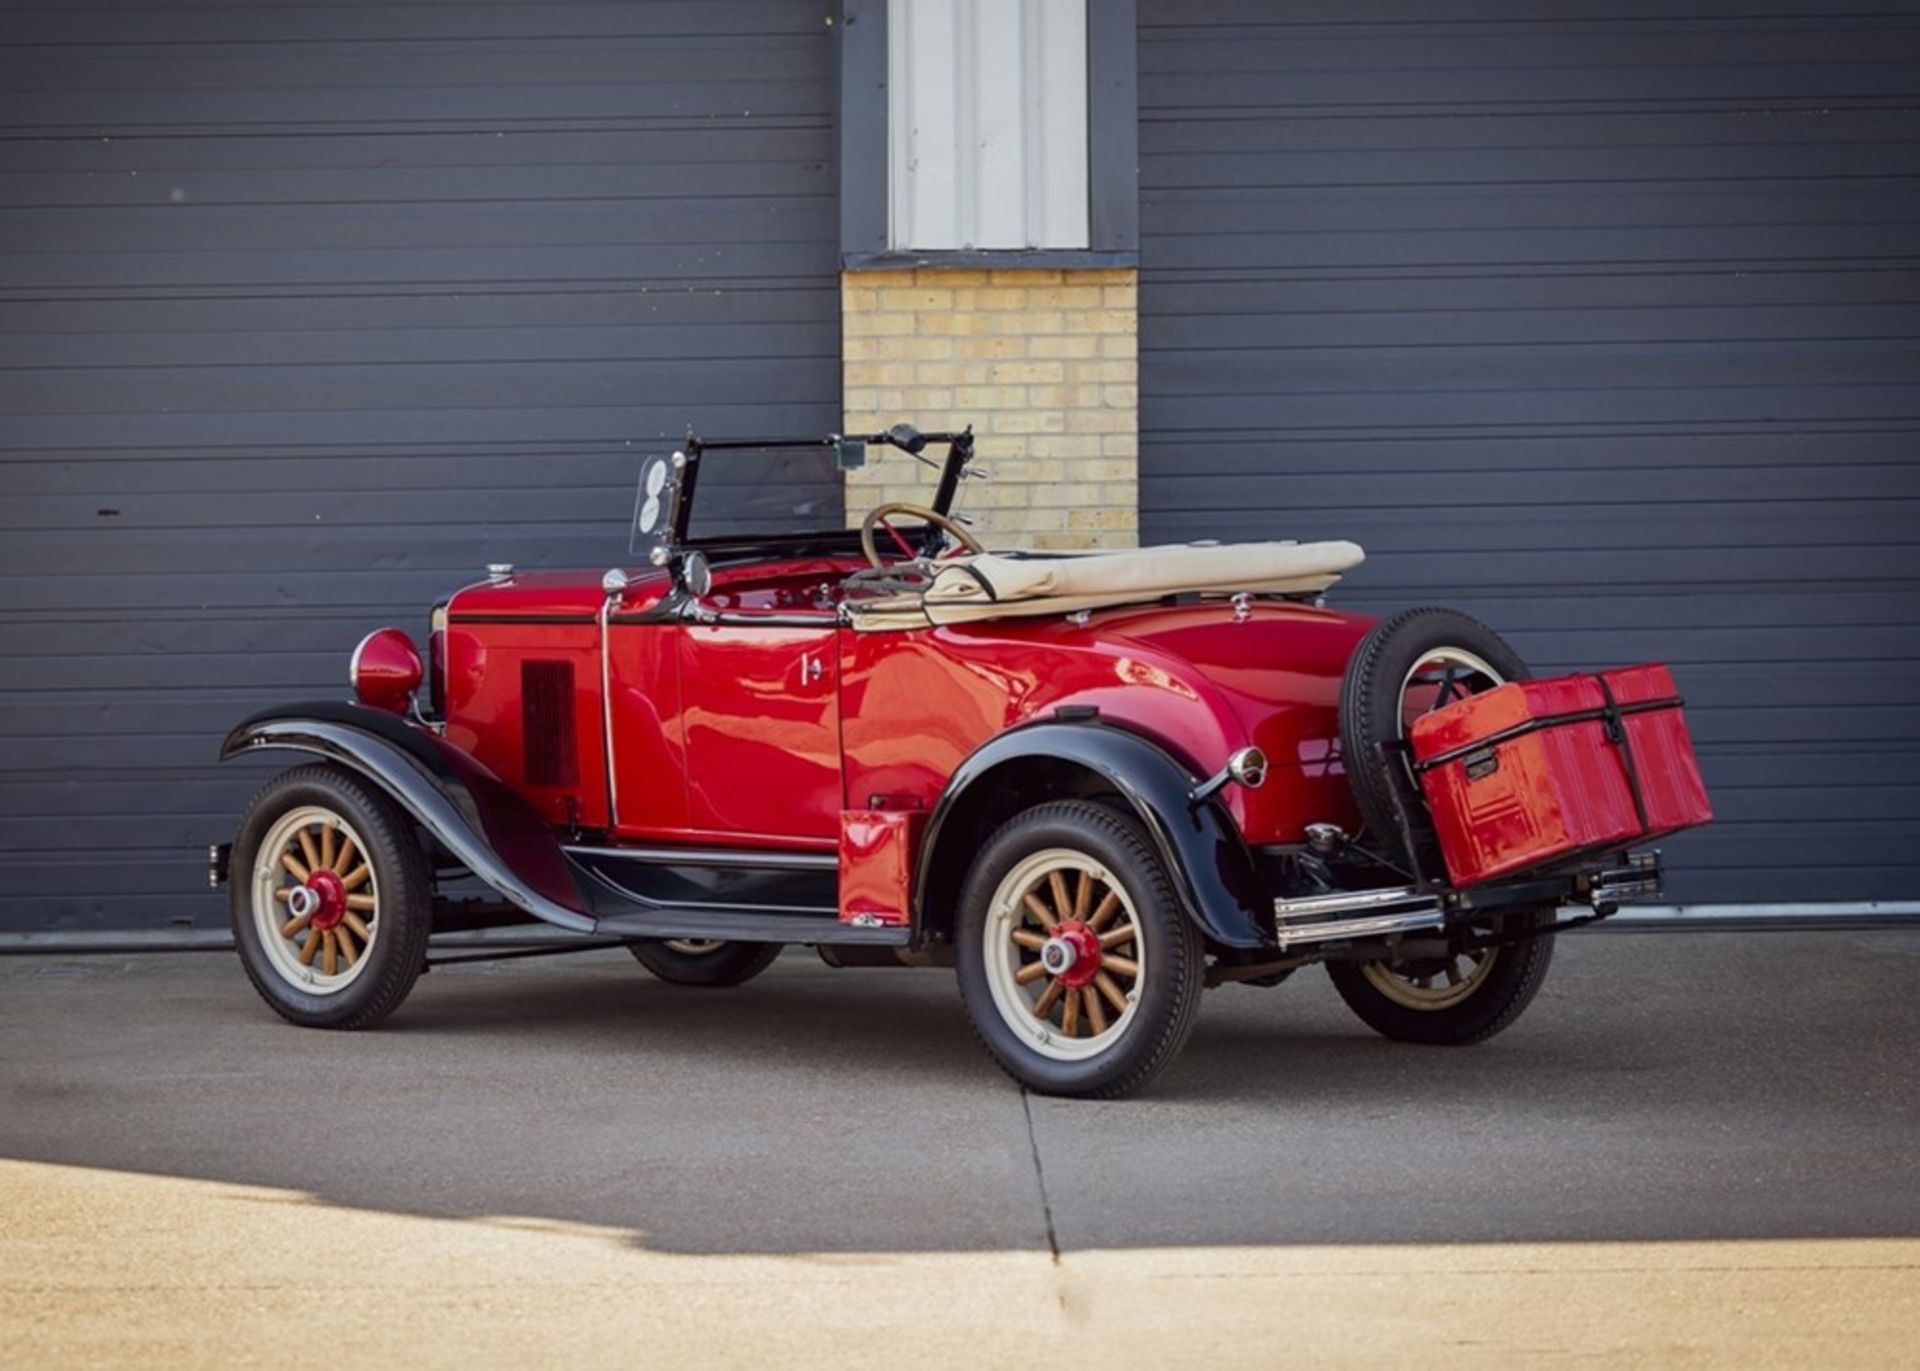 1930 Chevrolet Sports Roadster - Image 6 of 9